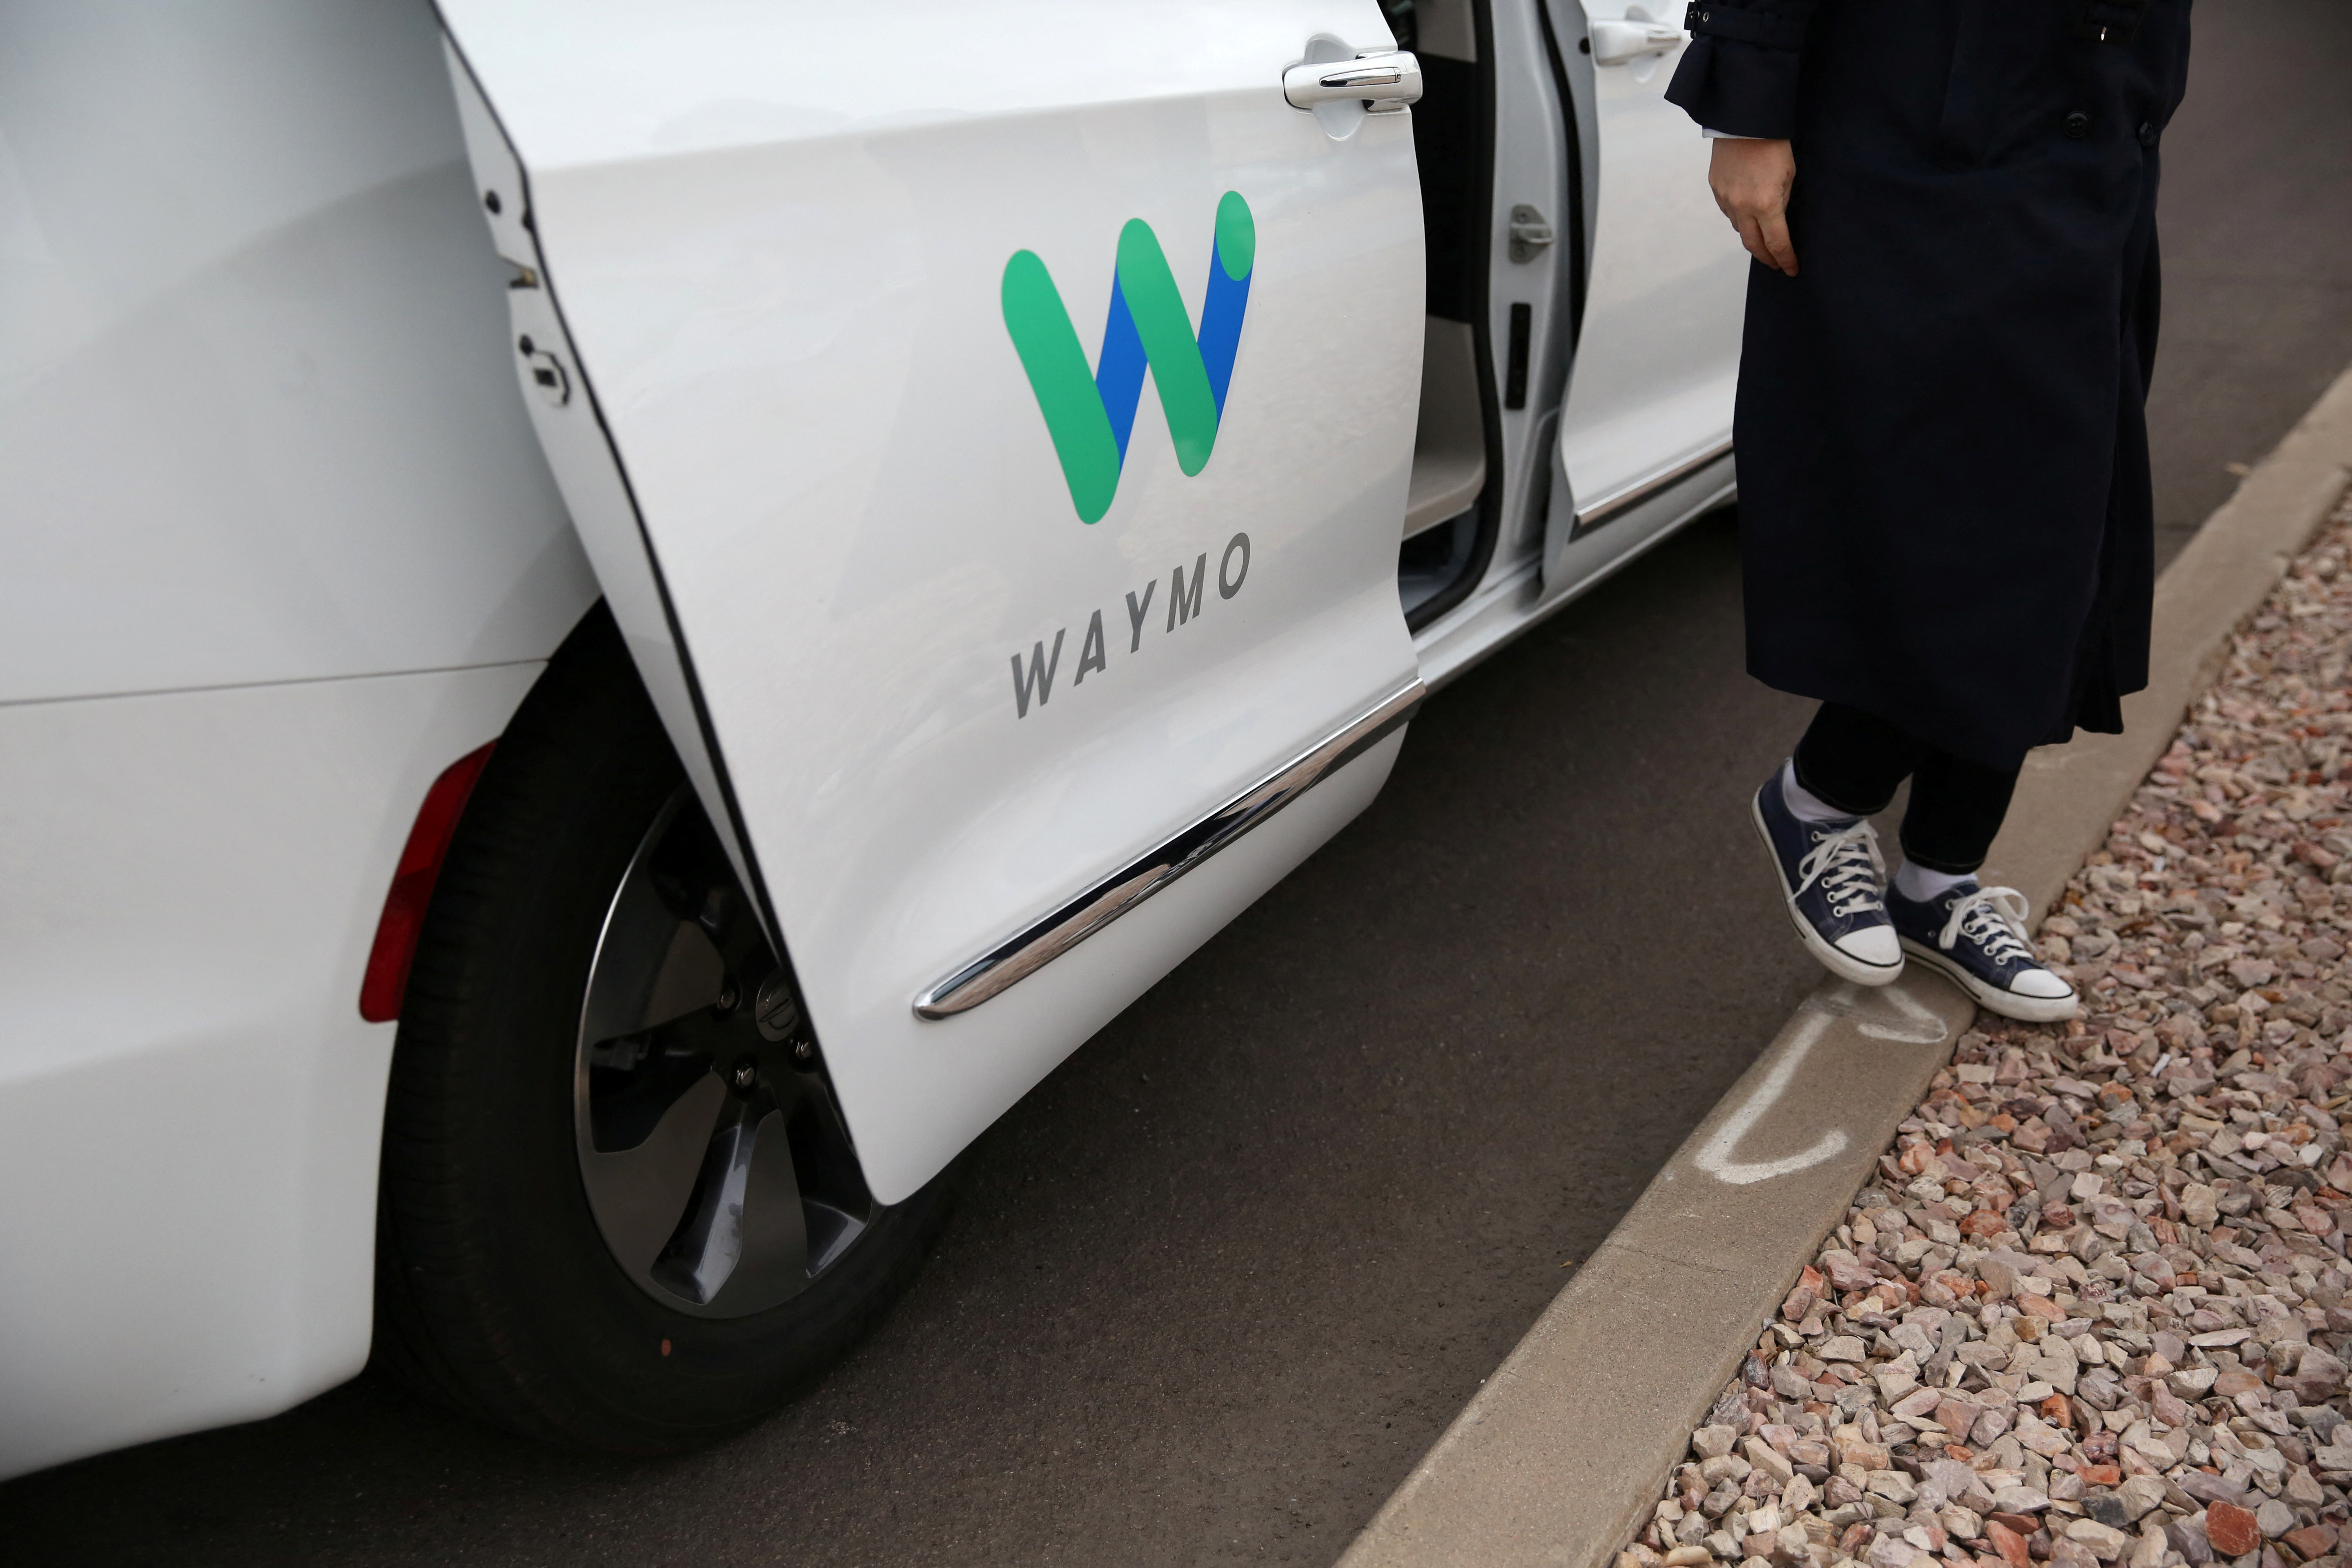 Reuters reporter Alexandria Sage steps out of a Waymo self-driving vehicle during a demonstration in Chandler, Arizona